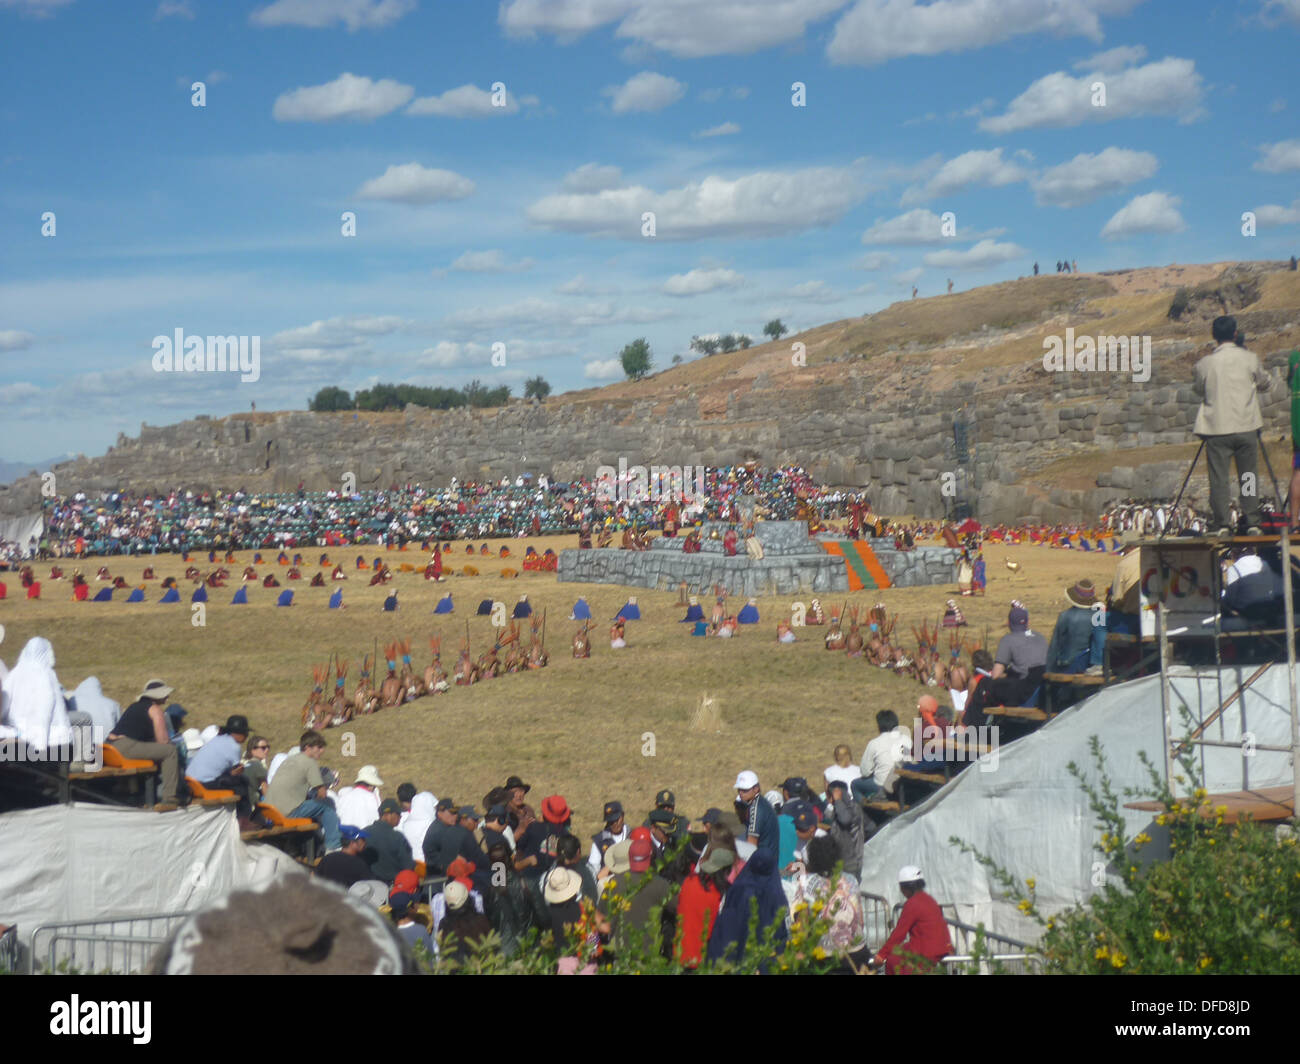 The Inca Festival of Inti Raymi being celebrated at the Sacsayhuaman site, Cusco, Peru Stock Photo